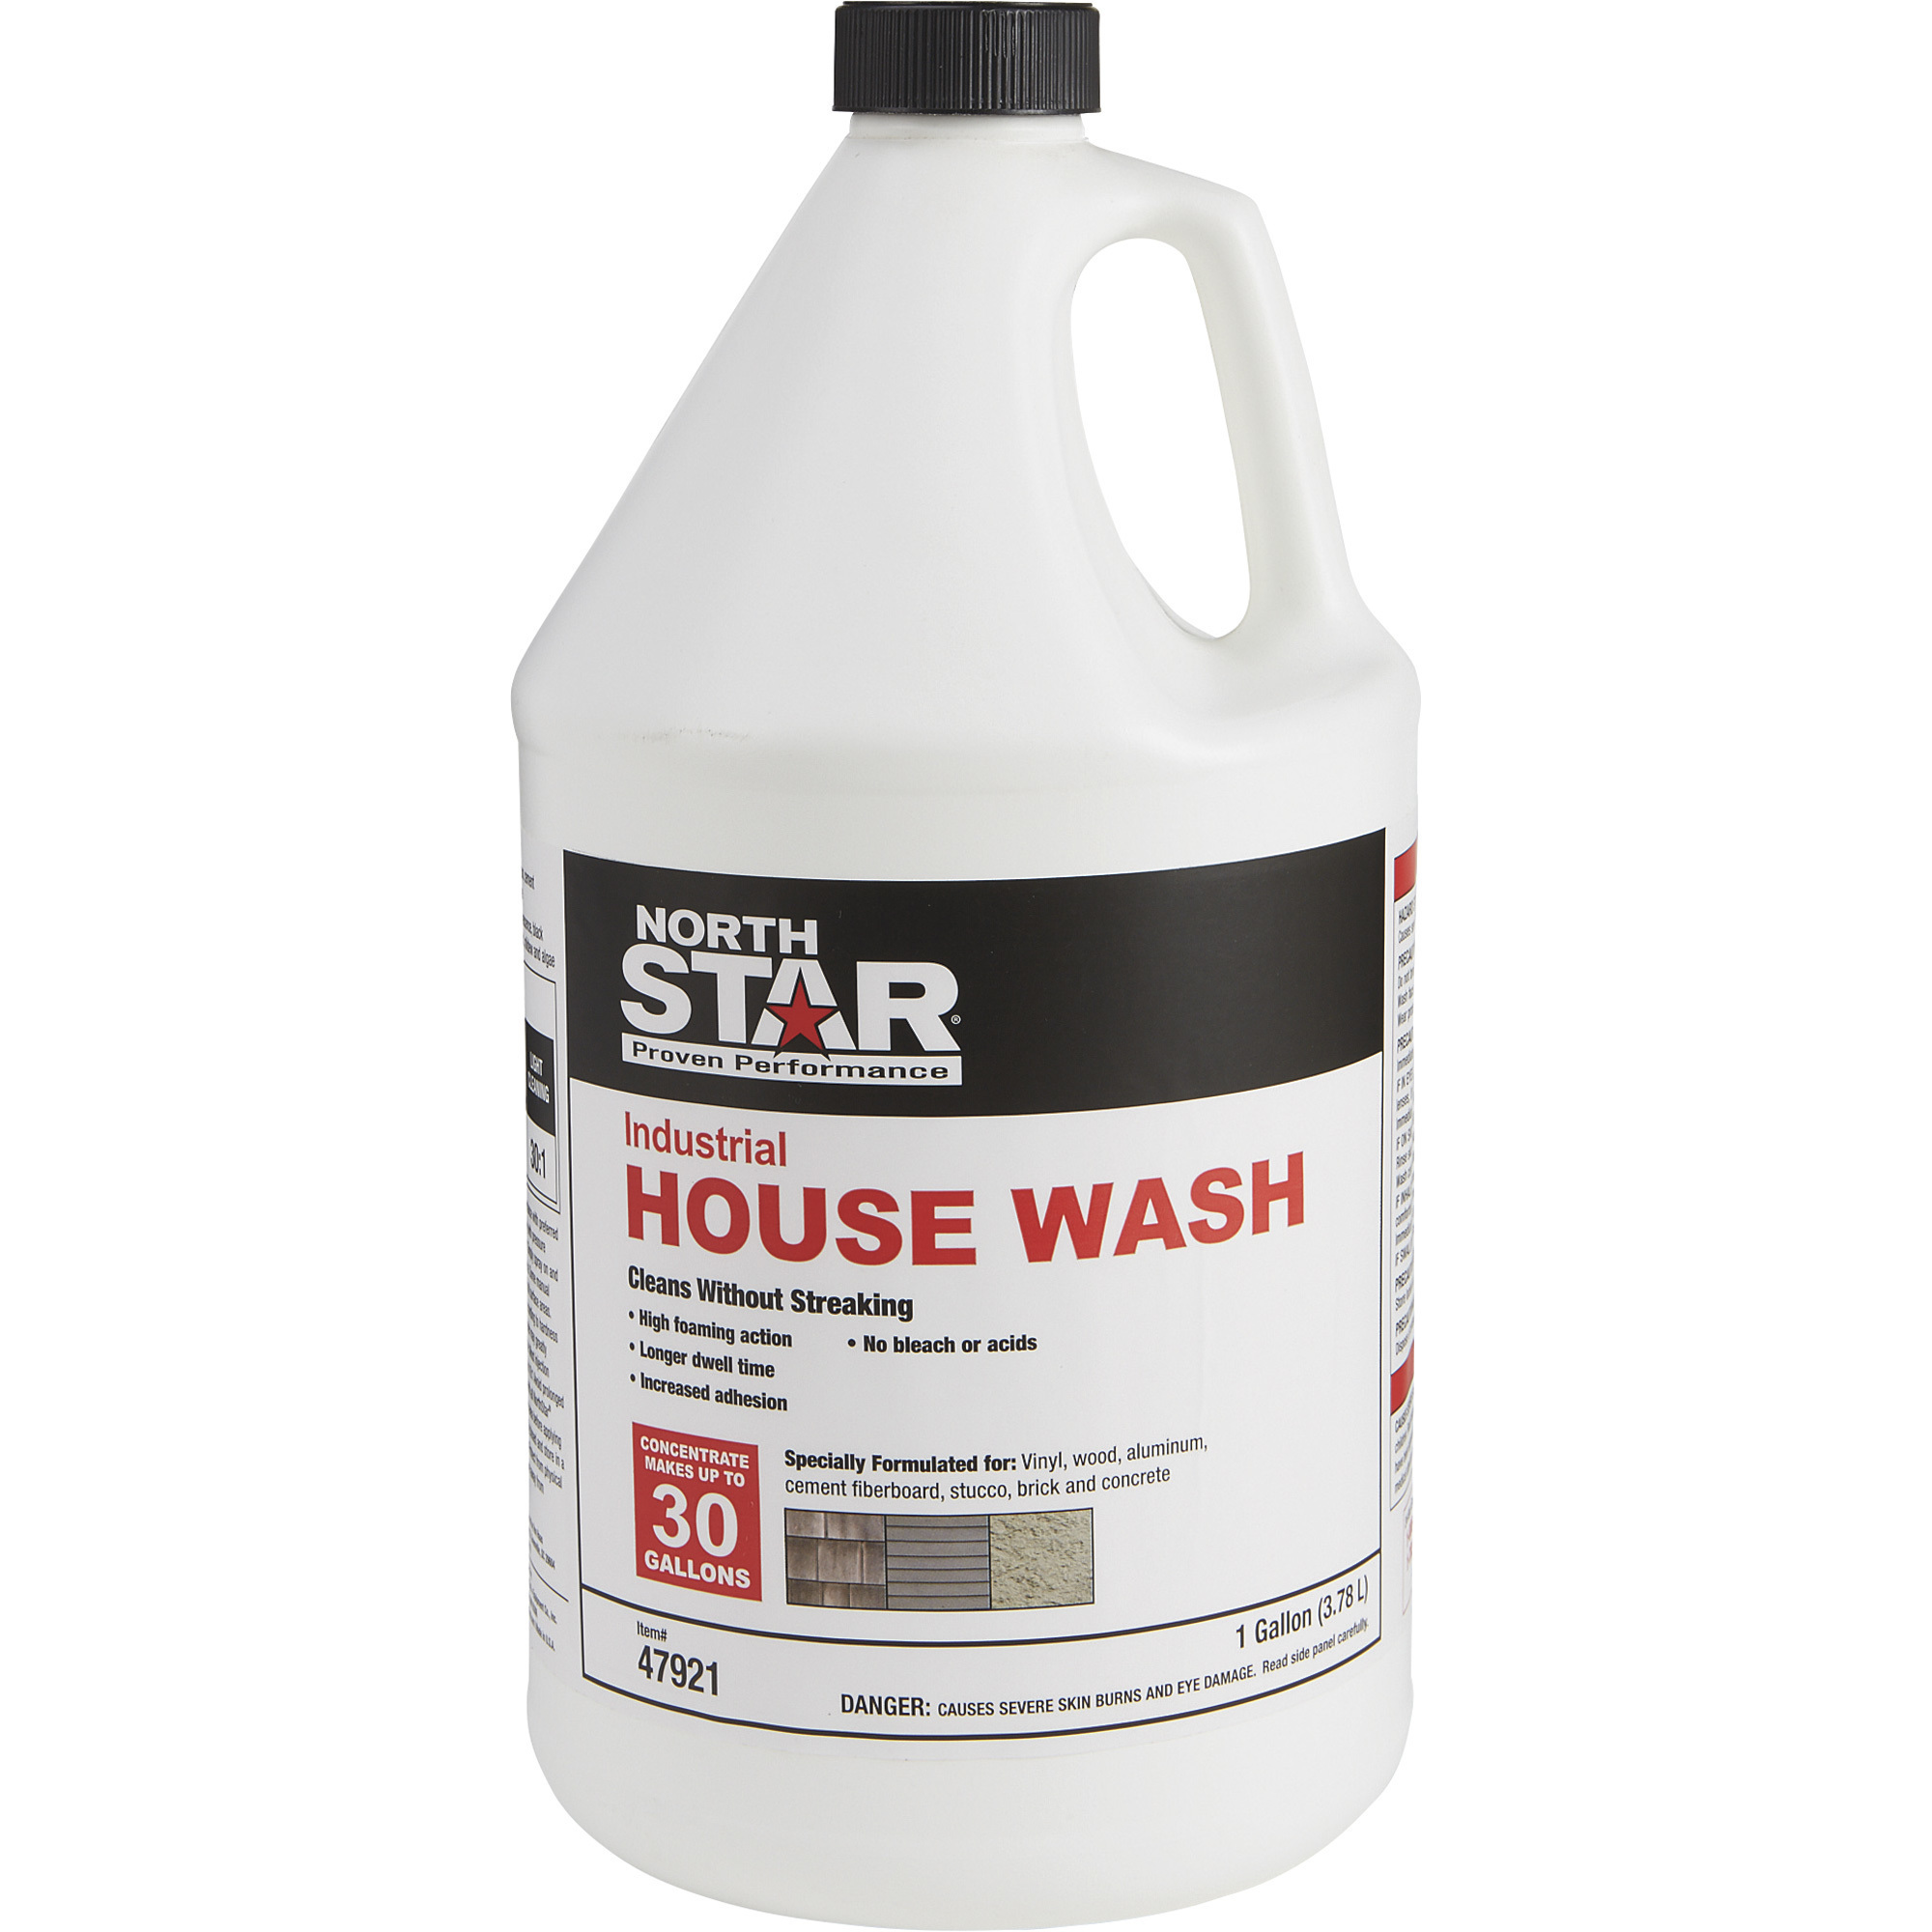 NorthStar Pressure Washer High-Performance House Wash Concentrate â 1-Gallon, Model NSHW1